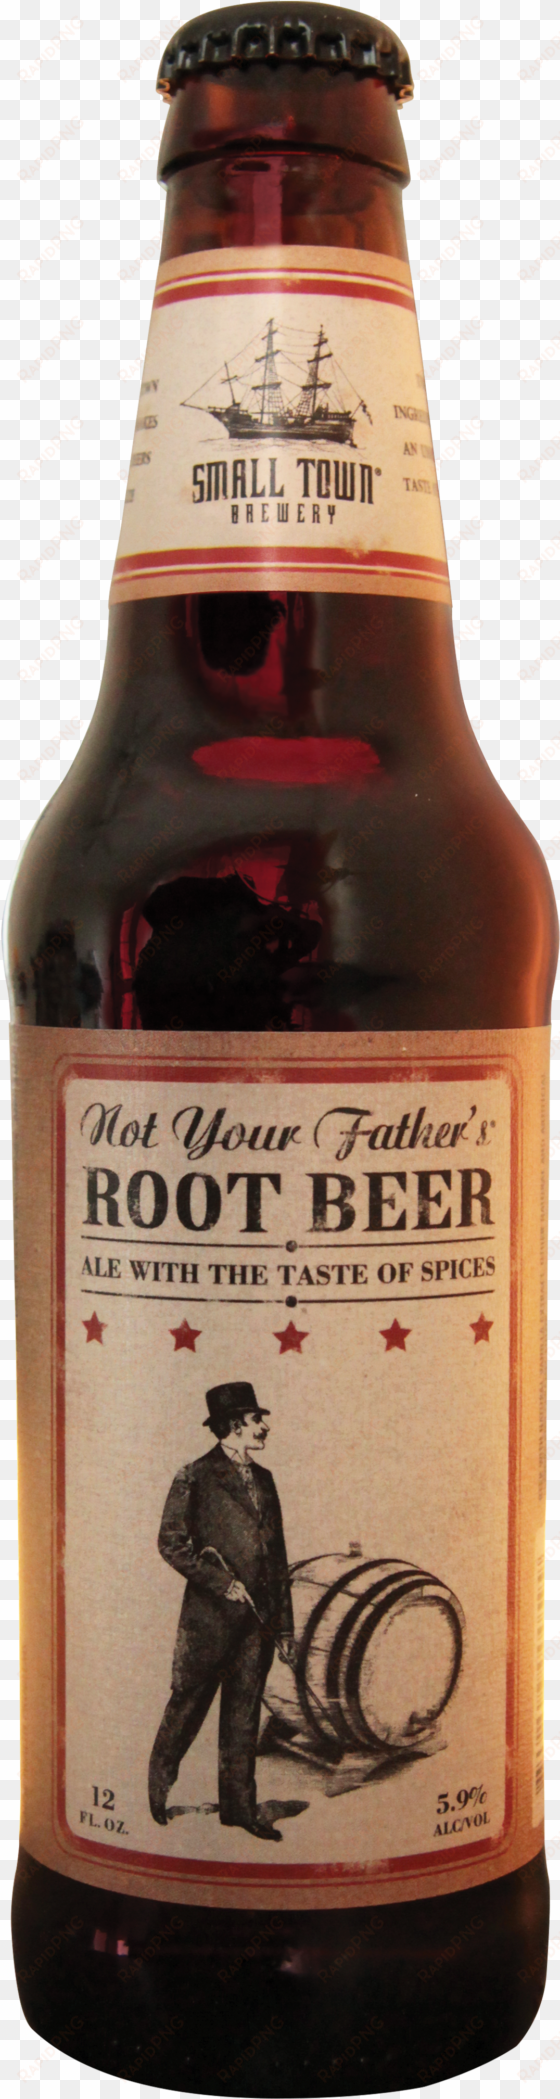 not your father's root beer uk